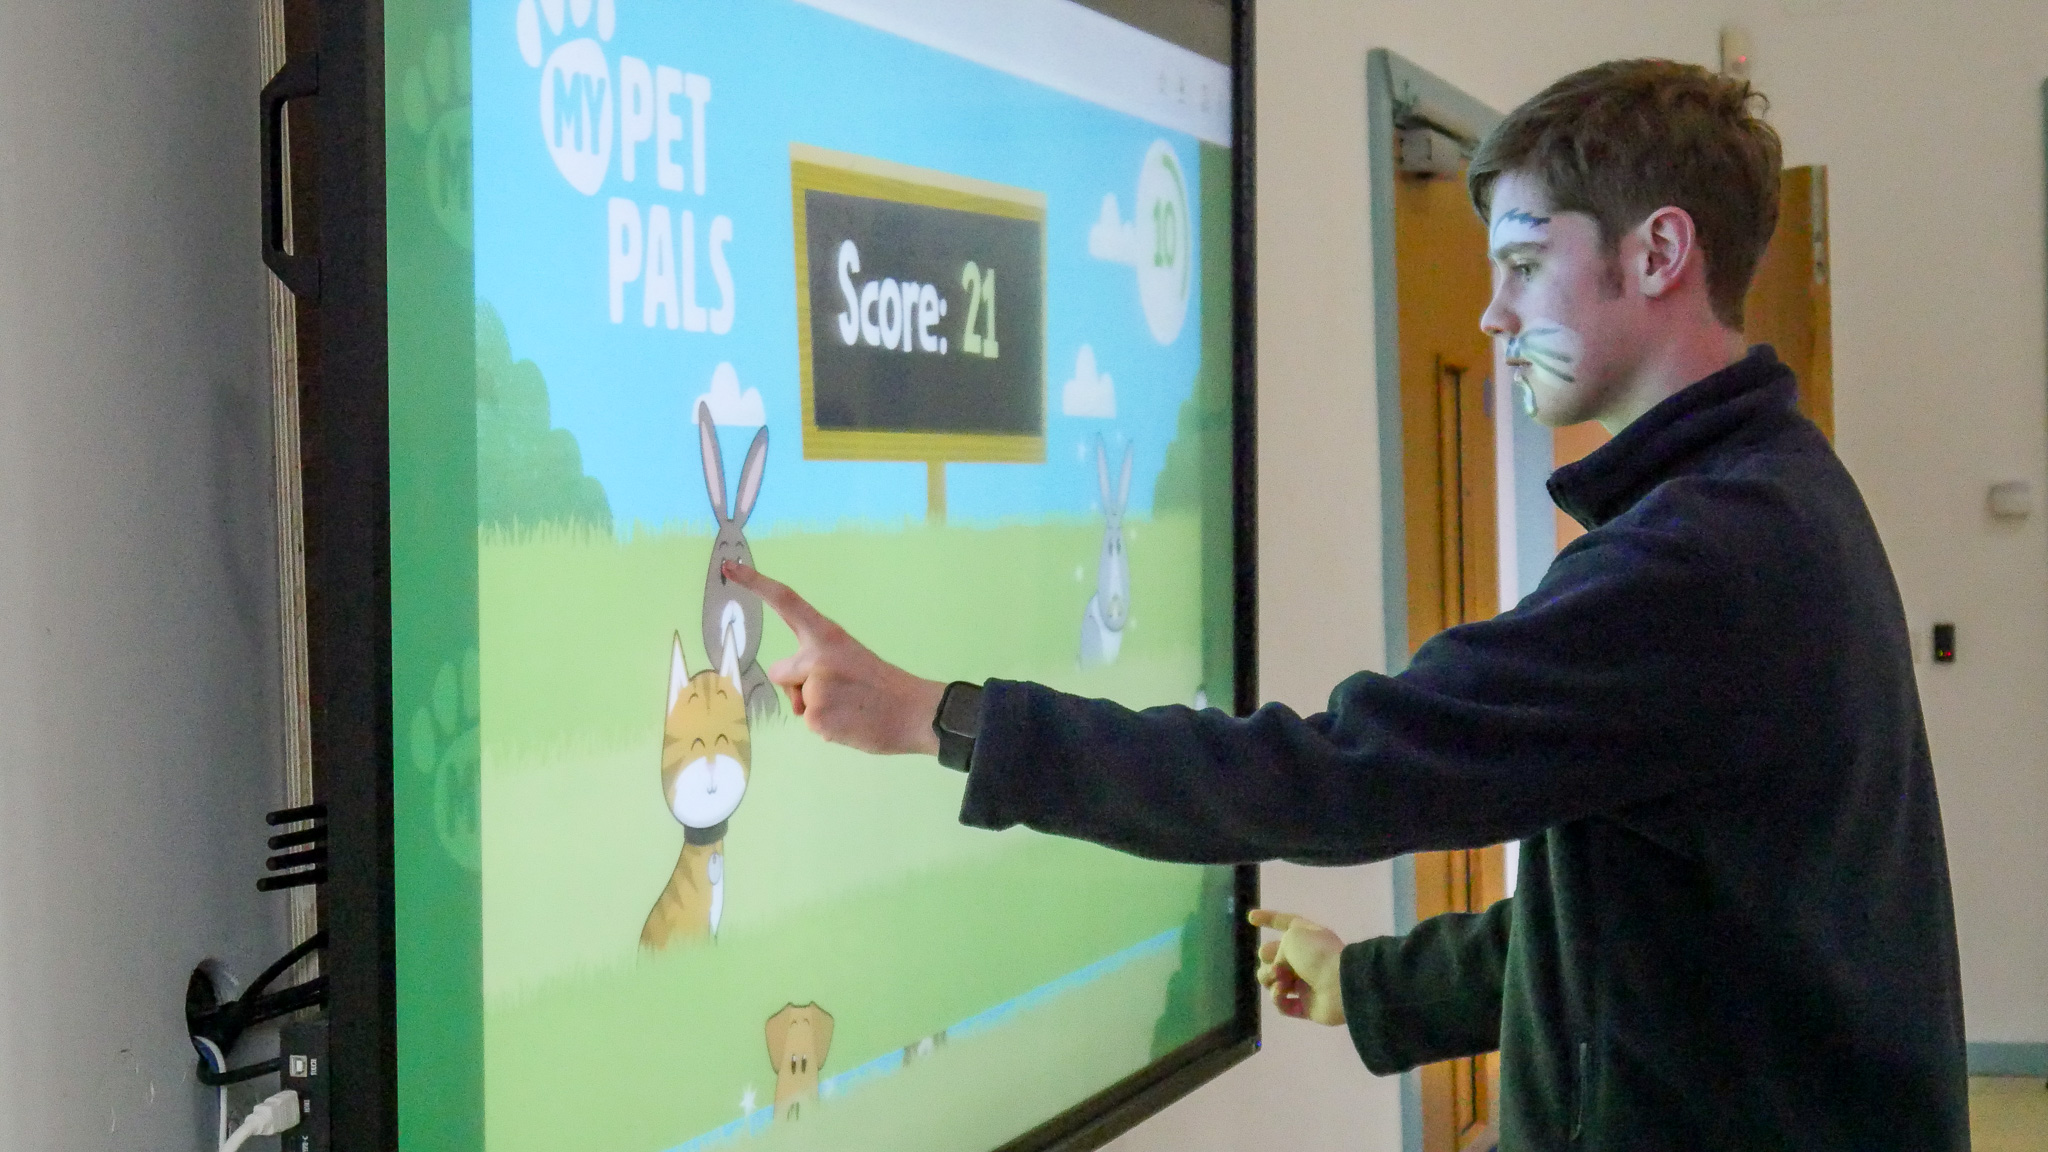 A student playing a video game on an interactive screen. His face is painted like a cat.